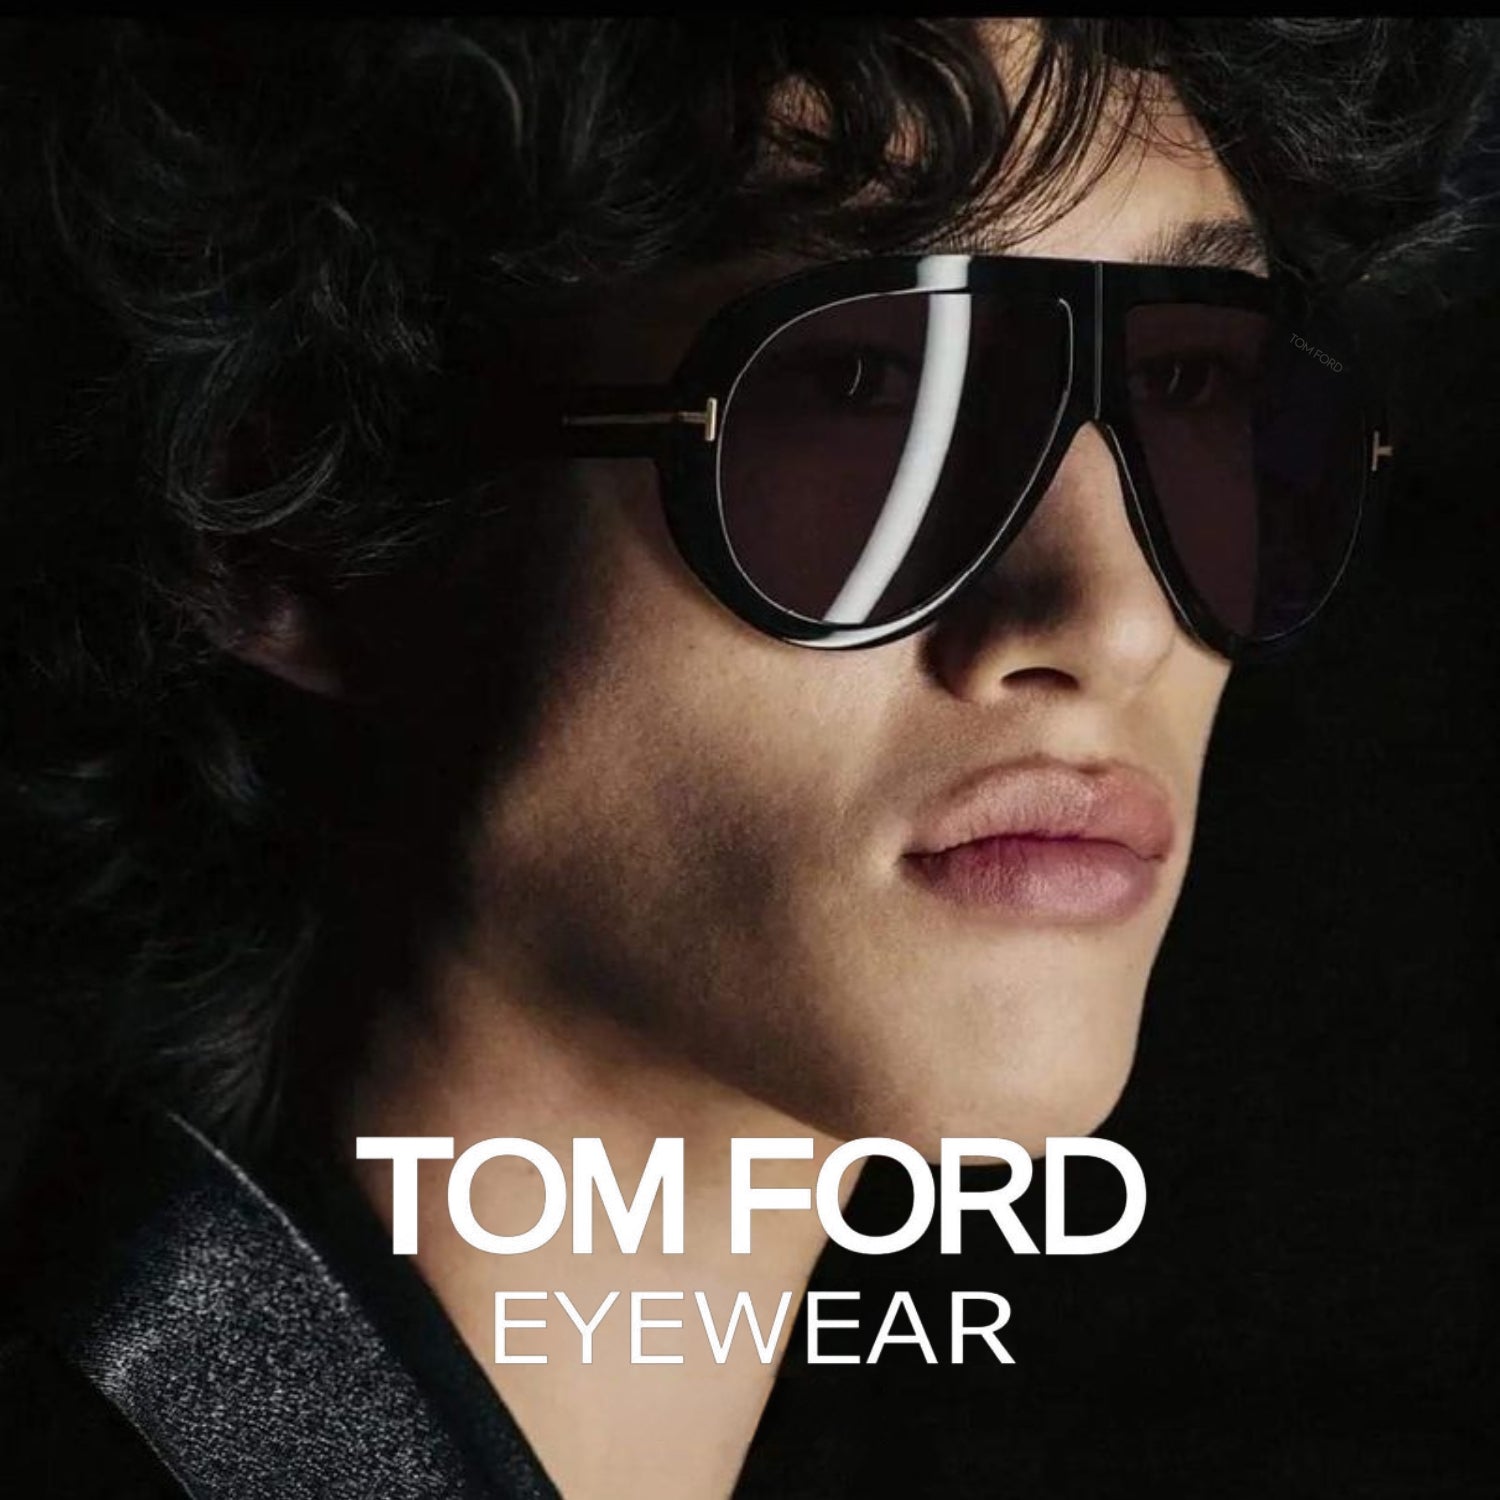 "A stylish image showcasing the Tom Ford Eyewear Spring/Summer 2024collection, featuring sunglasses and opticals for both men and women."